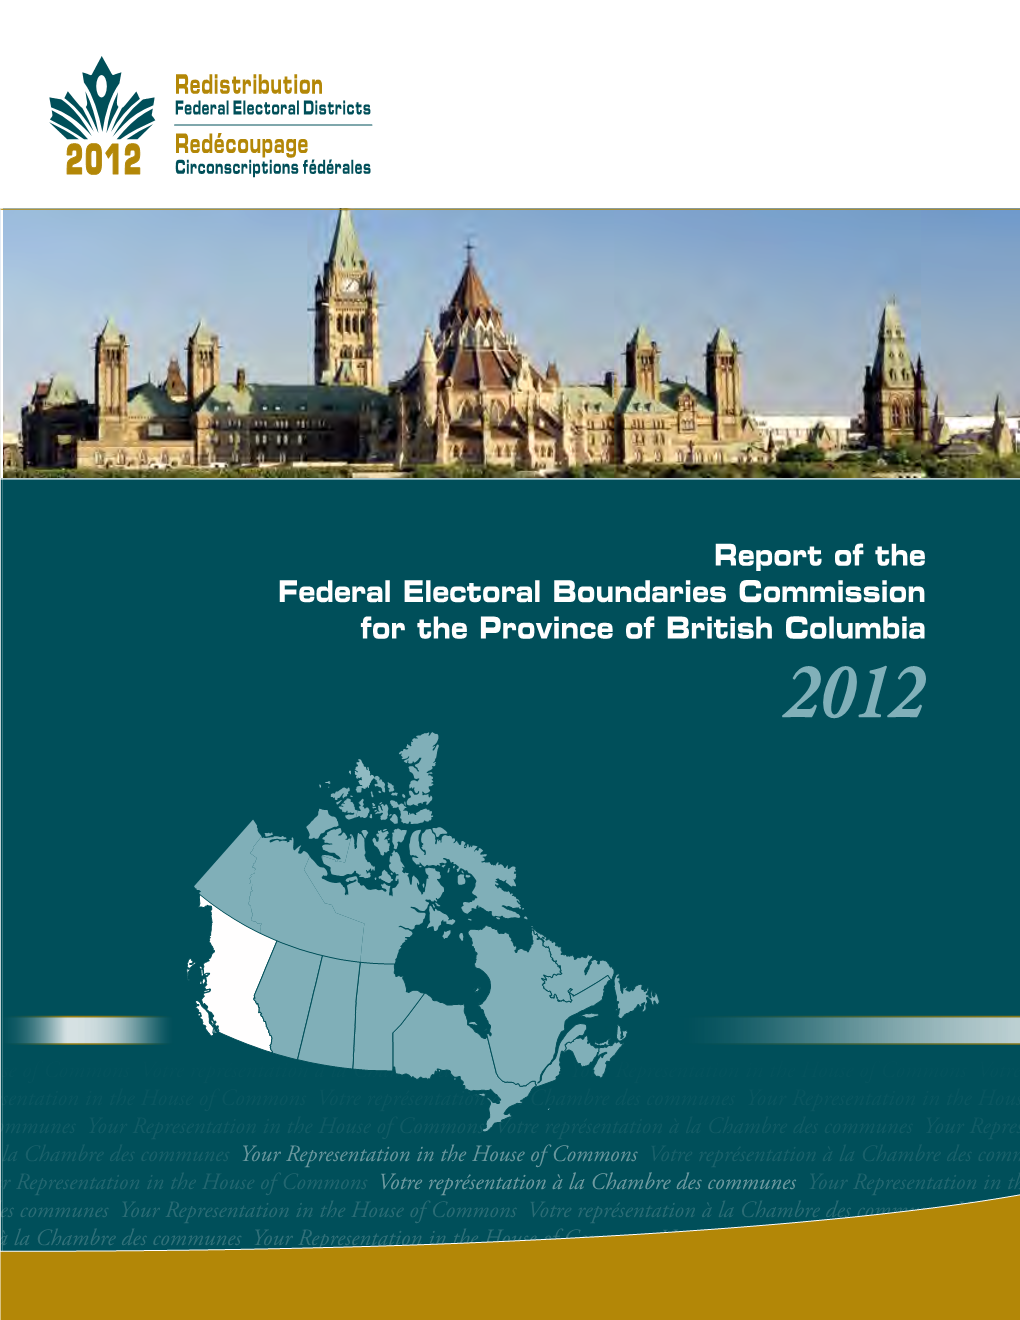 Report of the Federal Electoral Boundaries Commission for the Province of British Columbia 2012